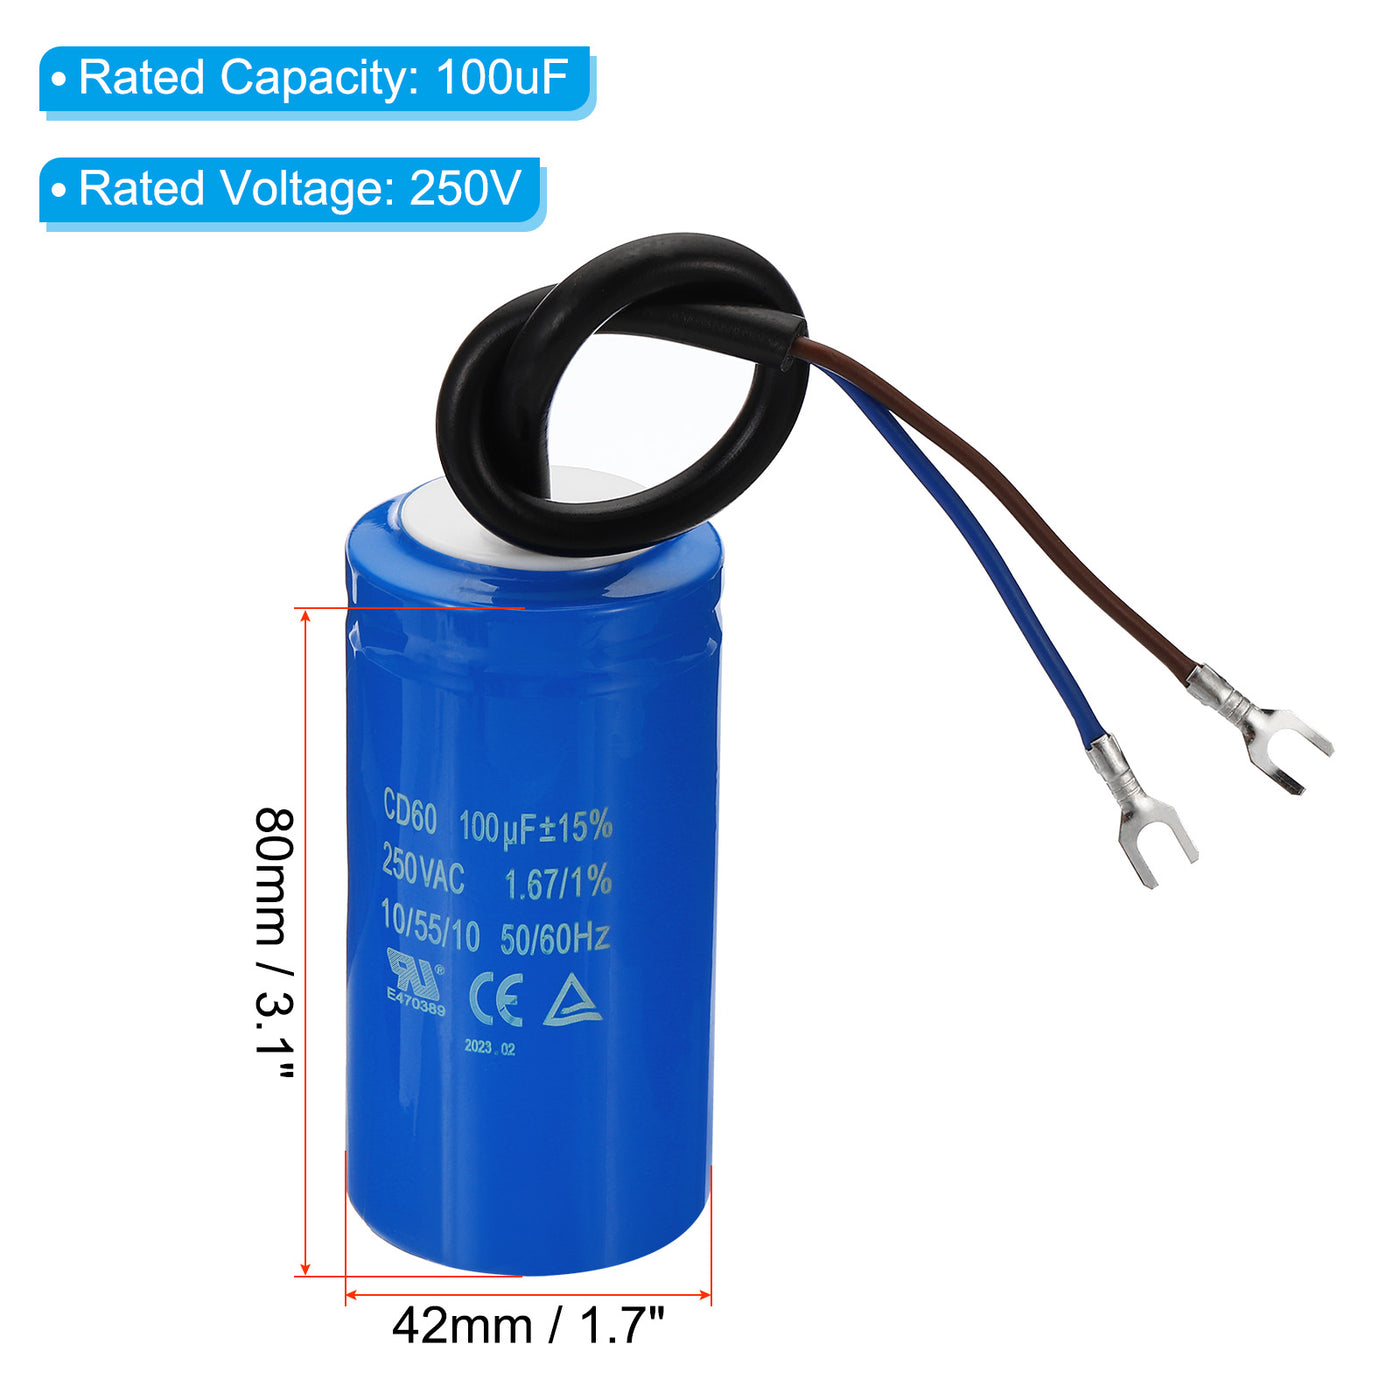 Harfington CD60 Run Capacitor, 2 Pack 100uF 250VAC 50/60Hz Motor Starting Capacitor with 2 Wires for Air Compressor Motor Starts Running